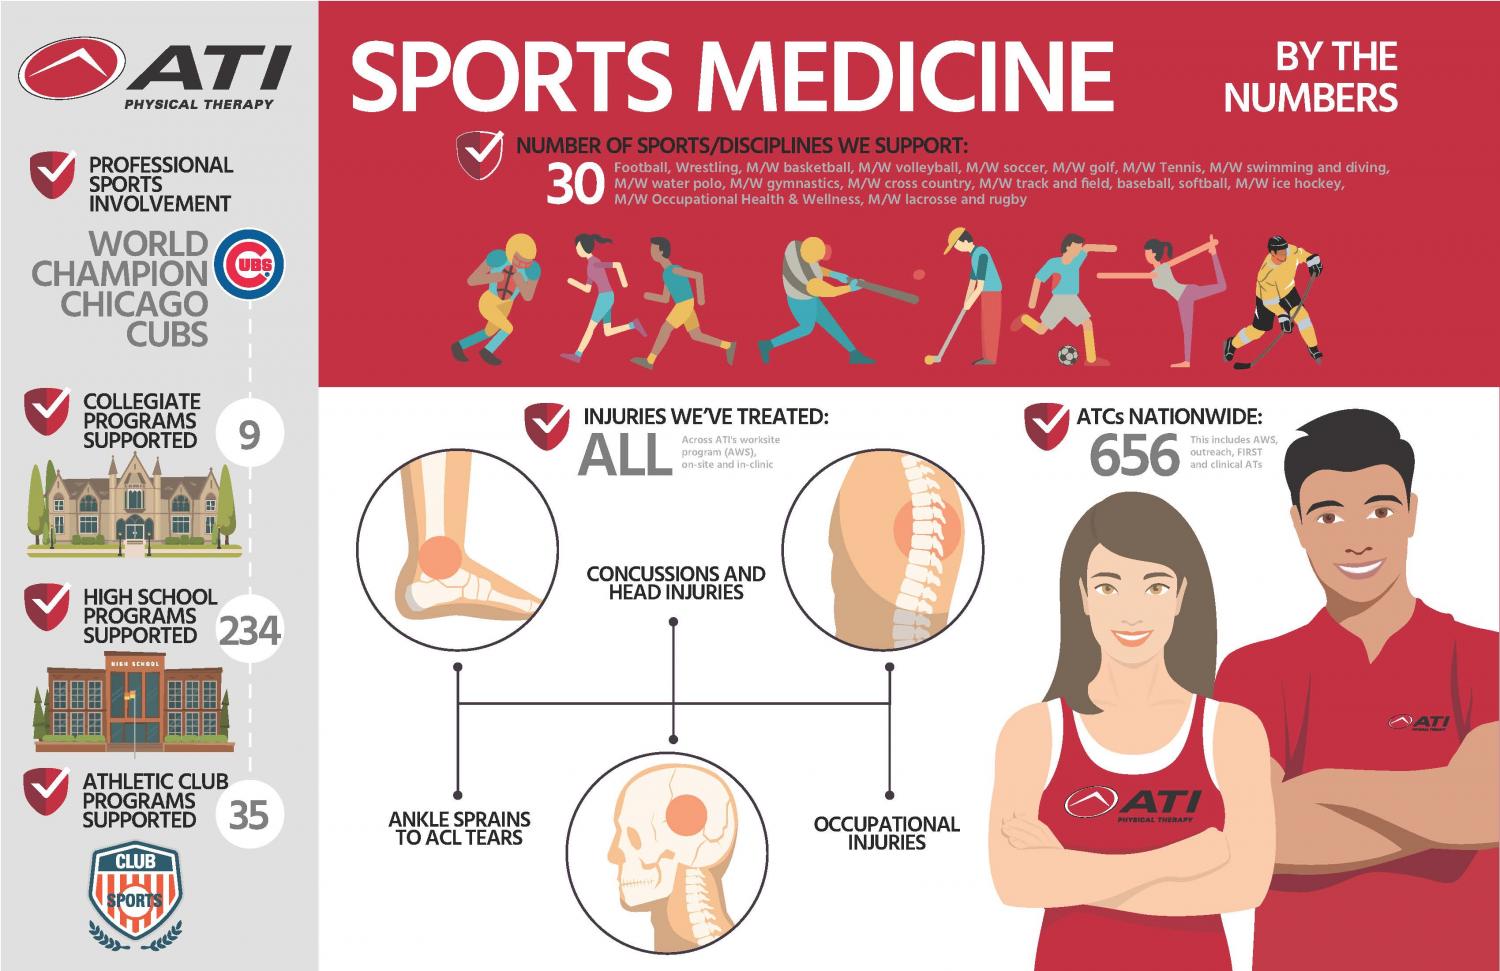 Sports Medicine - By The Numbers